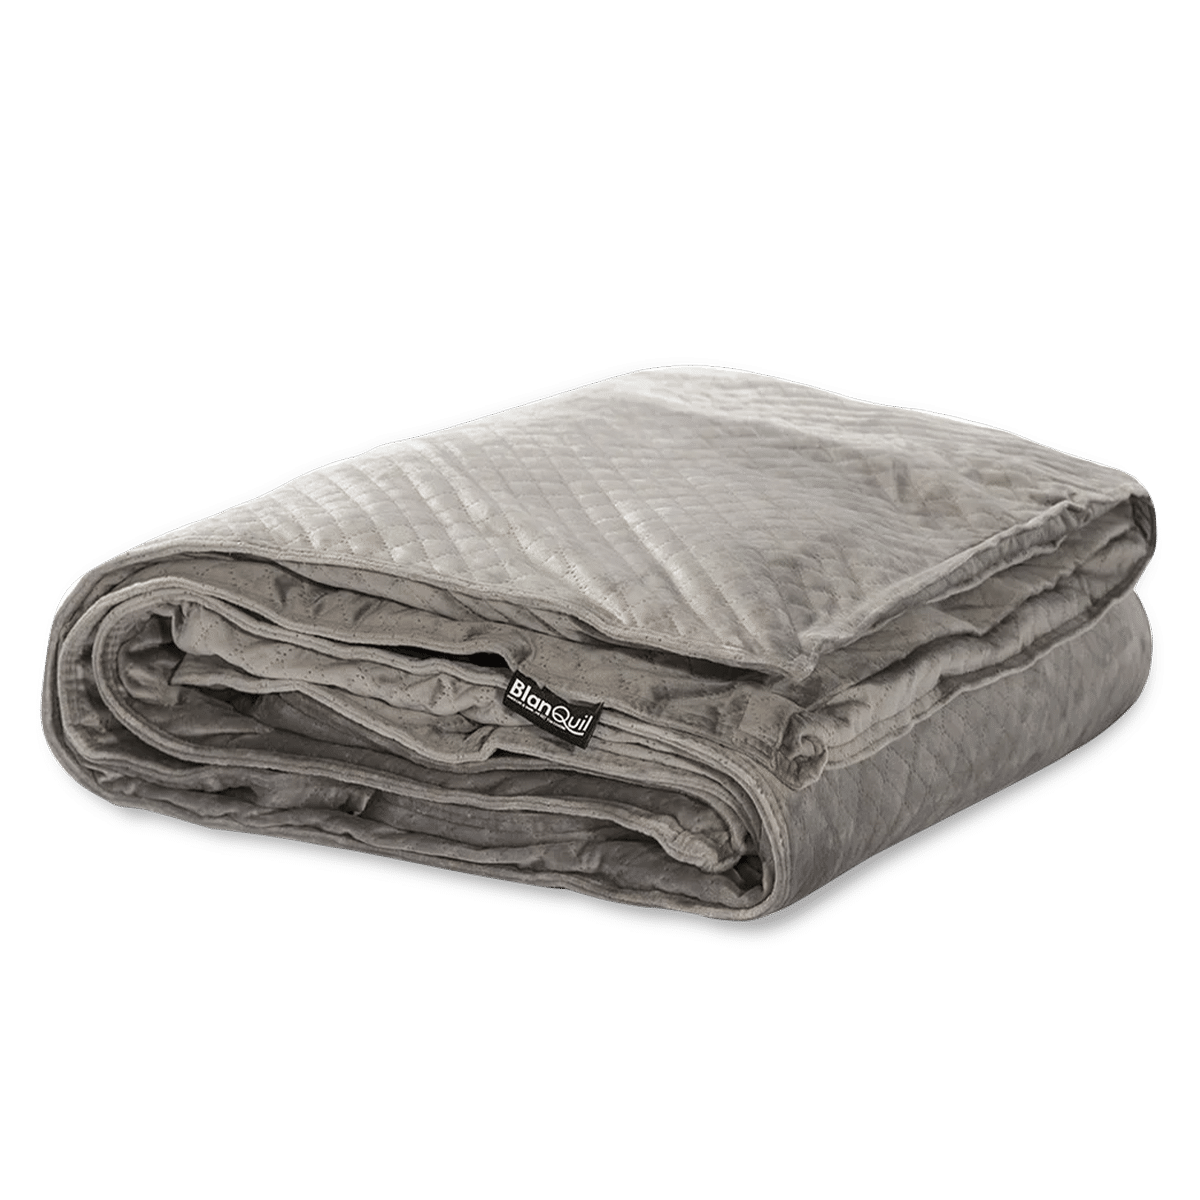 Nectar Mattress Review | Full Review | The Snooze Expert